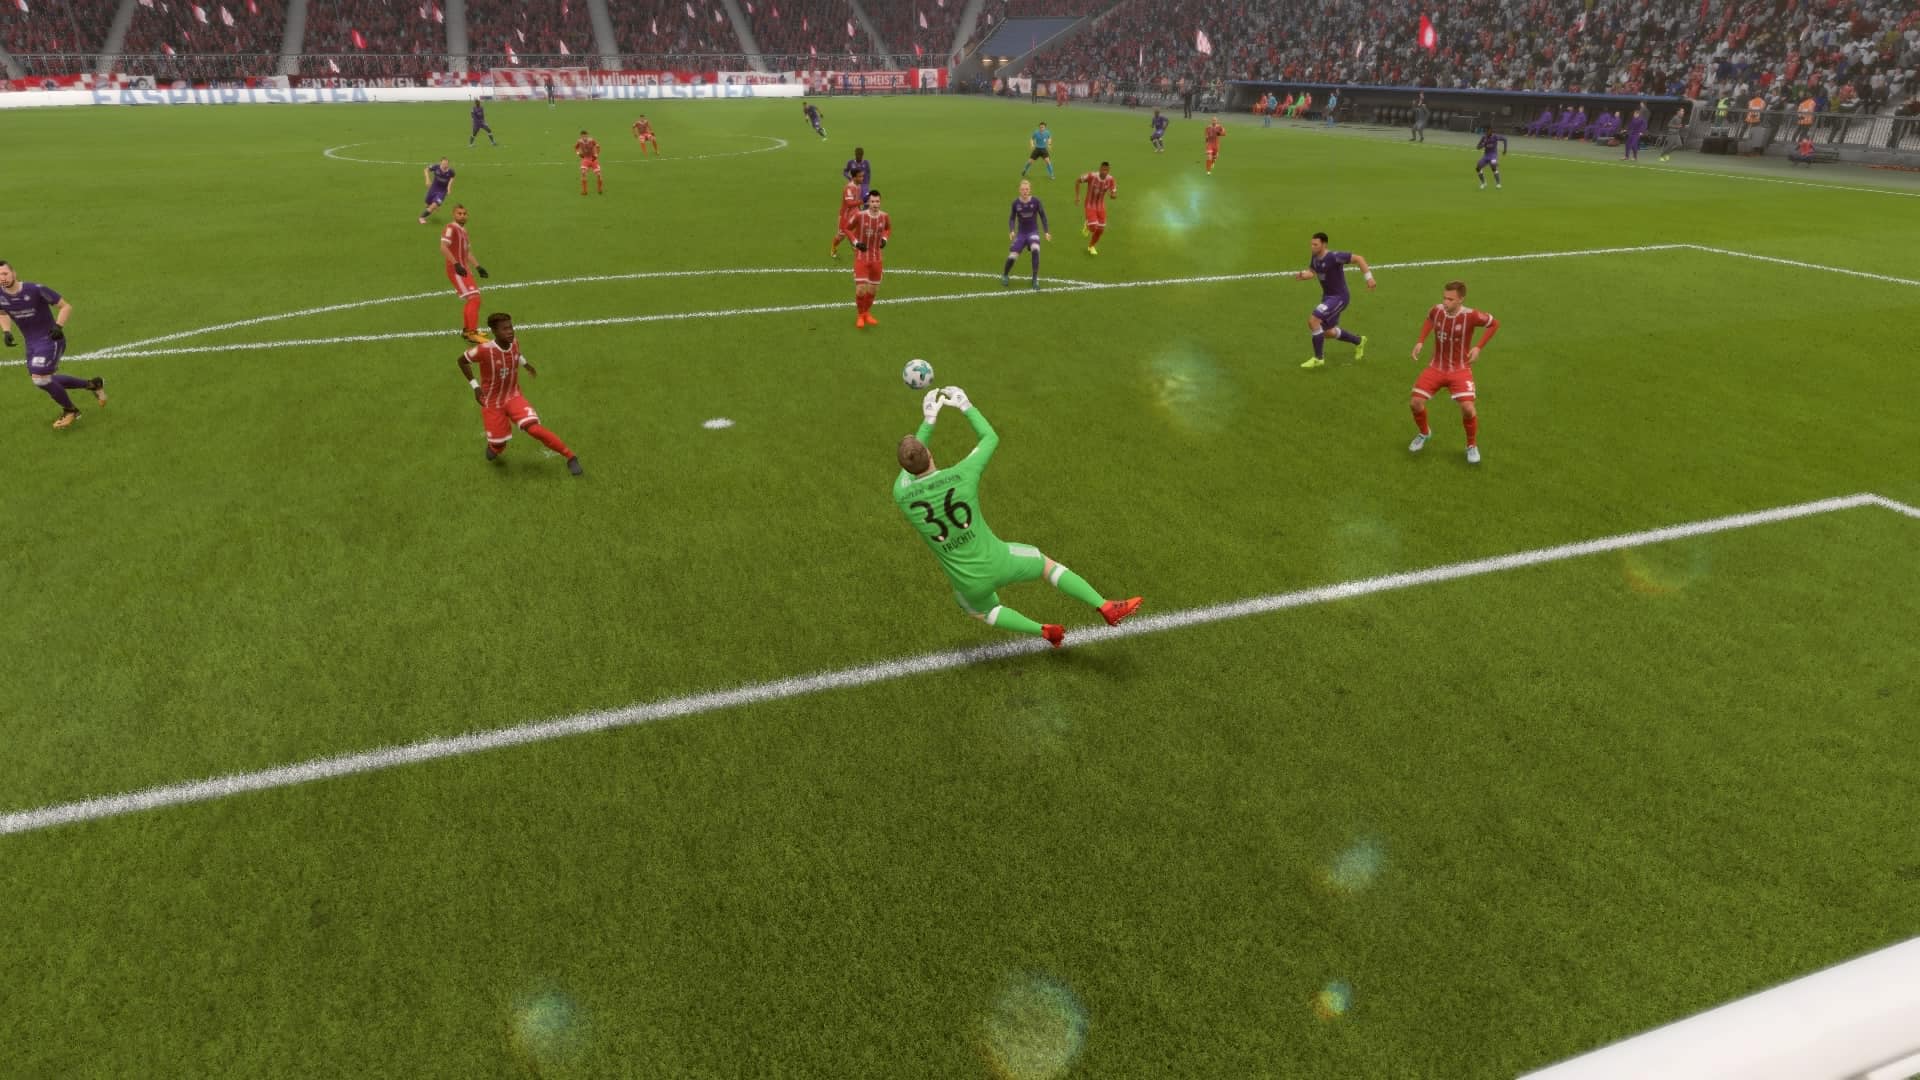 Christian Fruchtl makes a save in FIFA 18